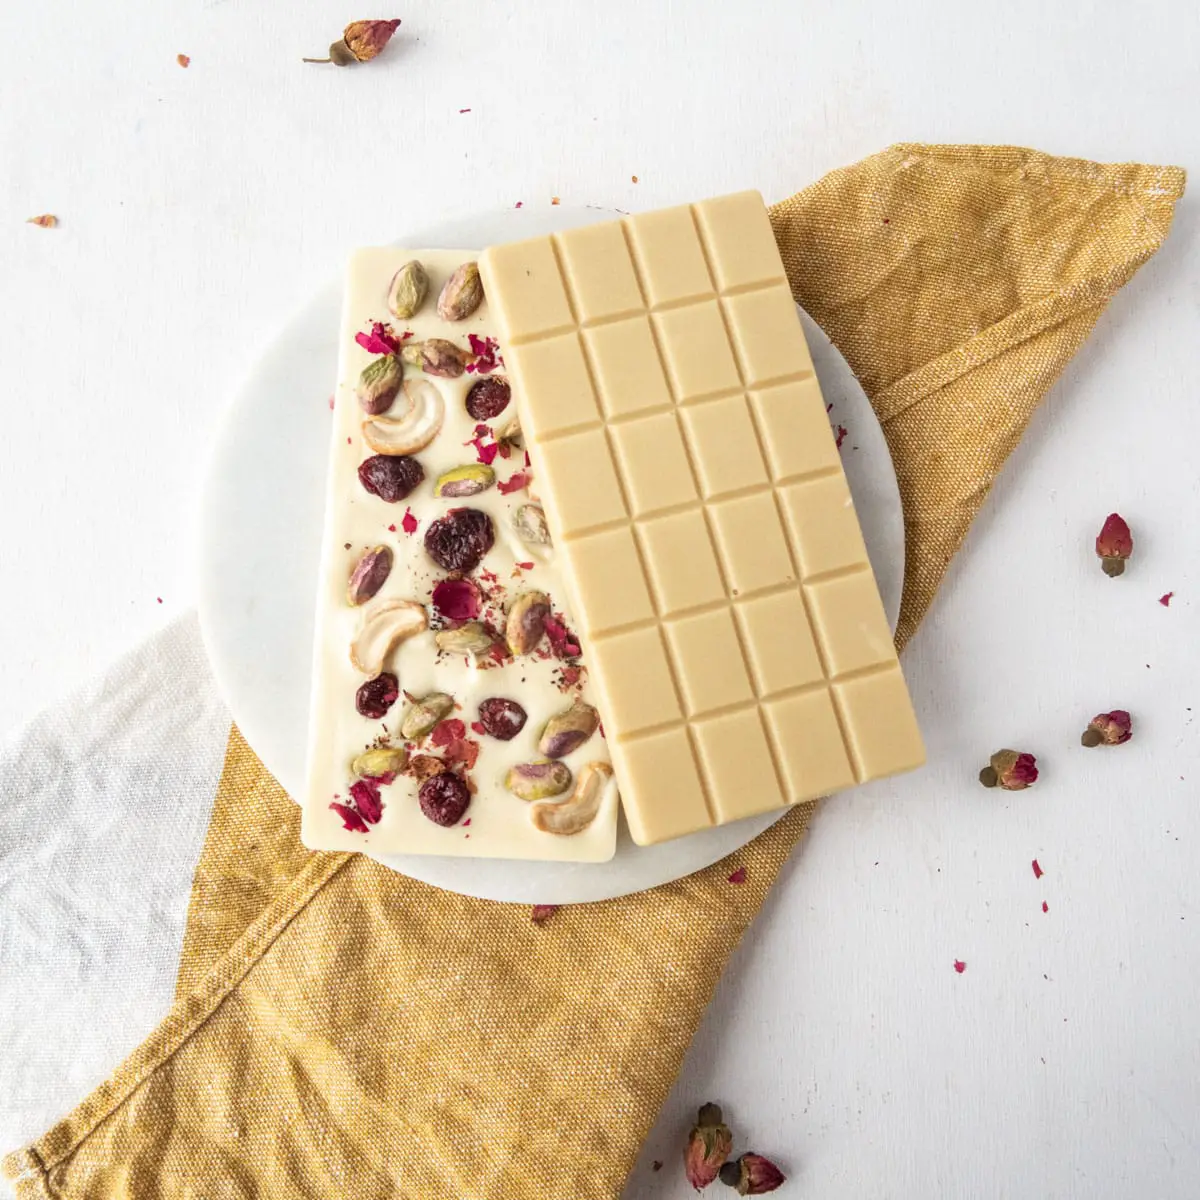 two vegan white chocolate bars on a white plate and mustard-coloured towel